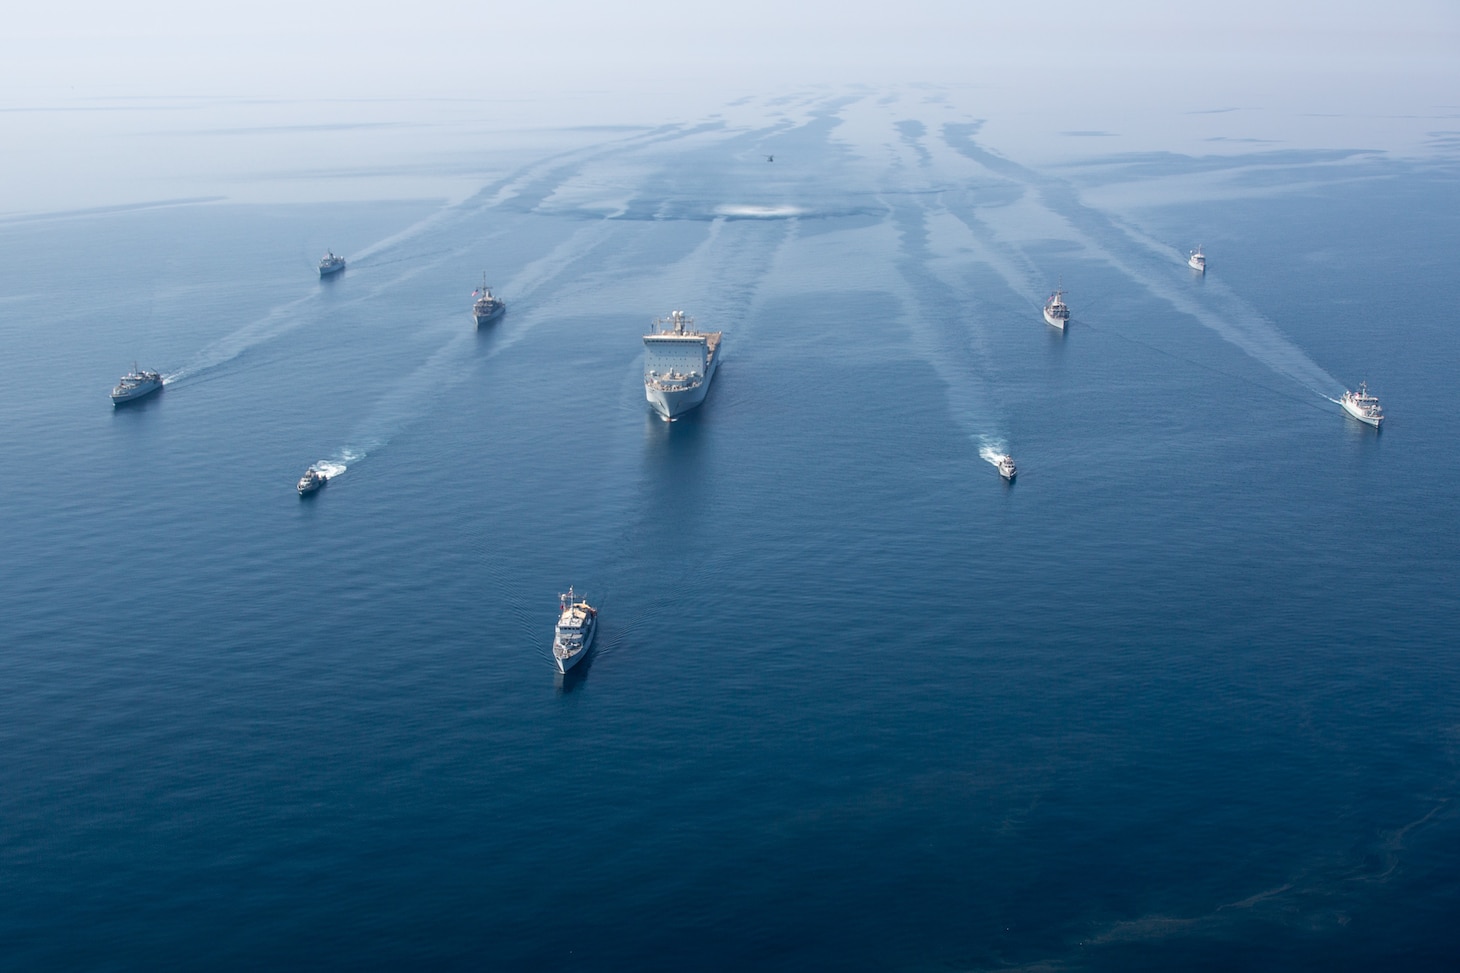 A multinational group of mine countermeasure ships from the French Marine Nationale, UK Royal Navy, U.S. Navy and a MH-53E Sea Dragon helicopter, attached to the “Blackhawks” of Helicopter Mine Countermeasures Squadron (HM-15), operate in formation during exercise Artemis Trident 21 in the Arabian Gulf.